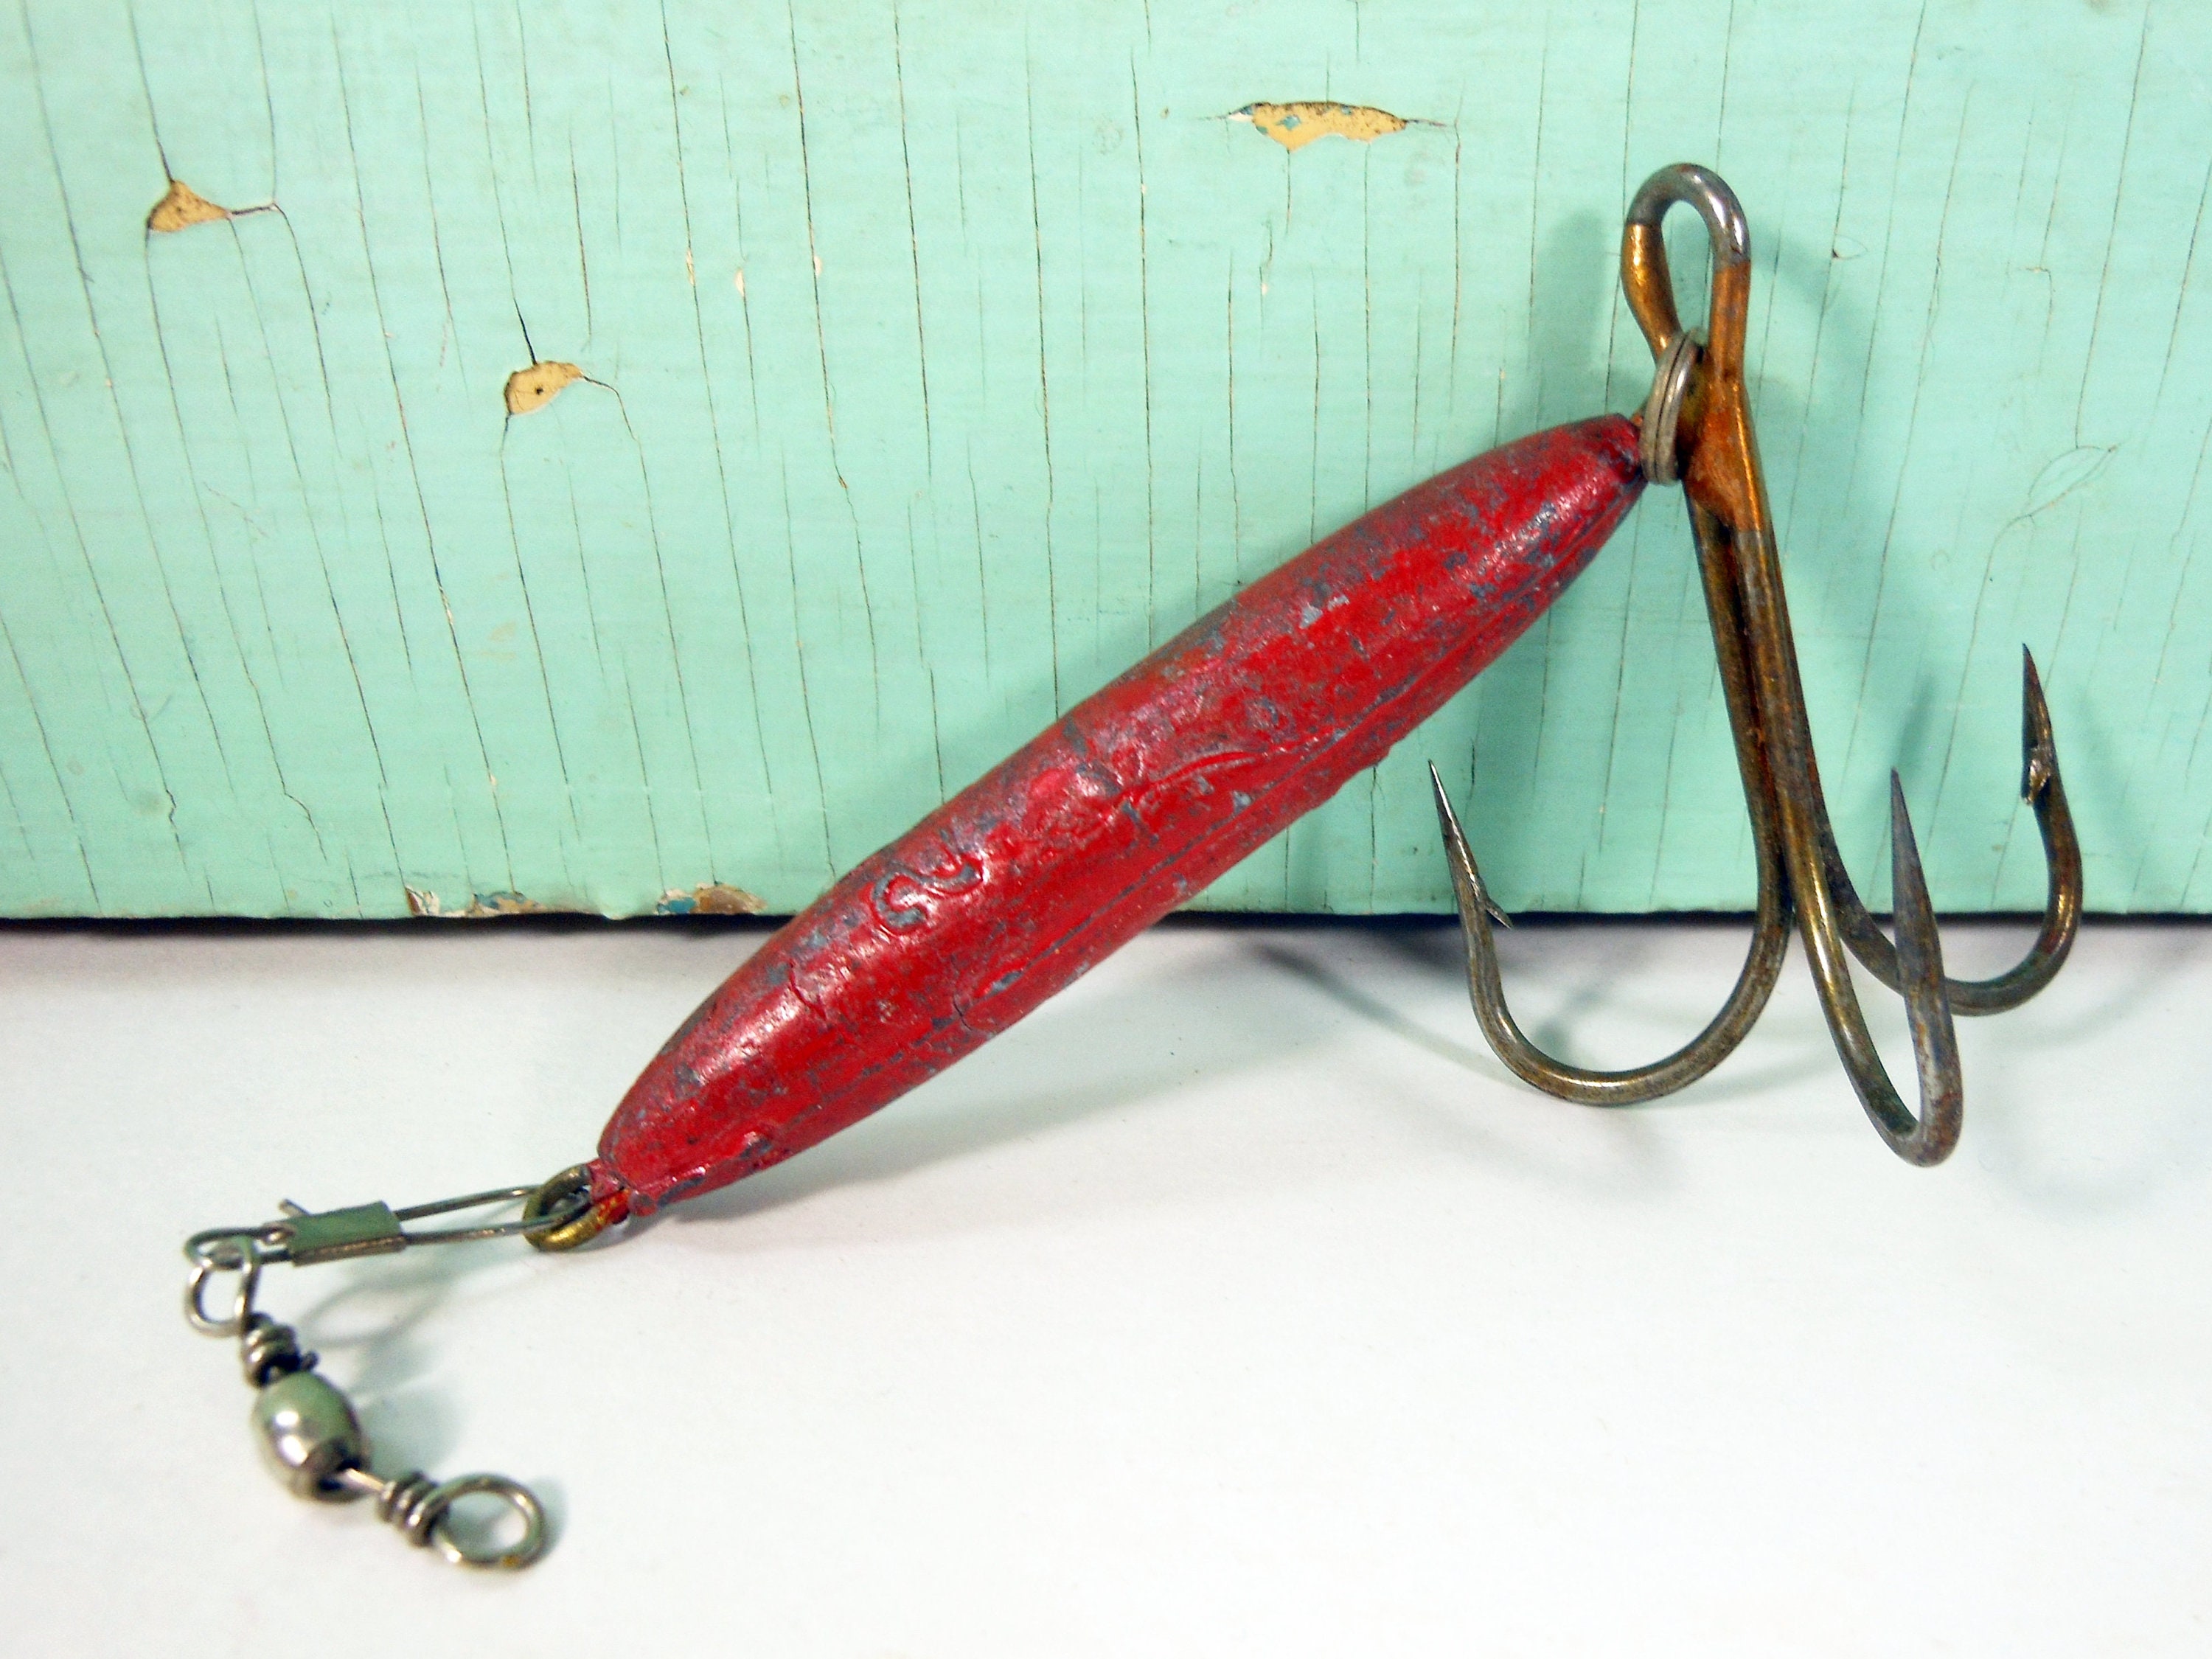 Vintage Fishing Tackle With Large Triple Hook and Heavy Red Sinker -   New Zealand